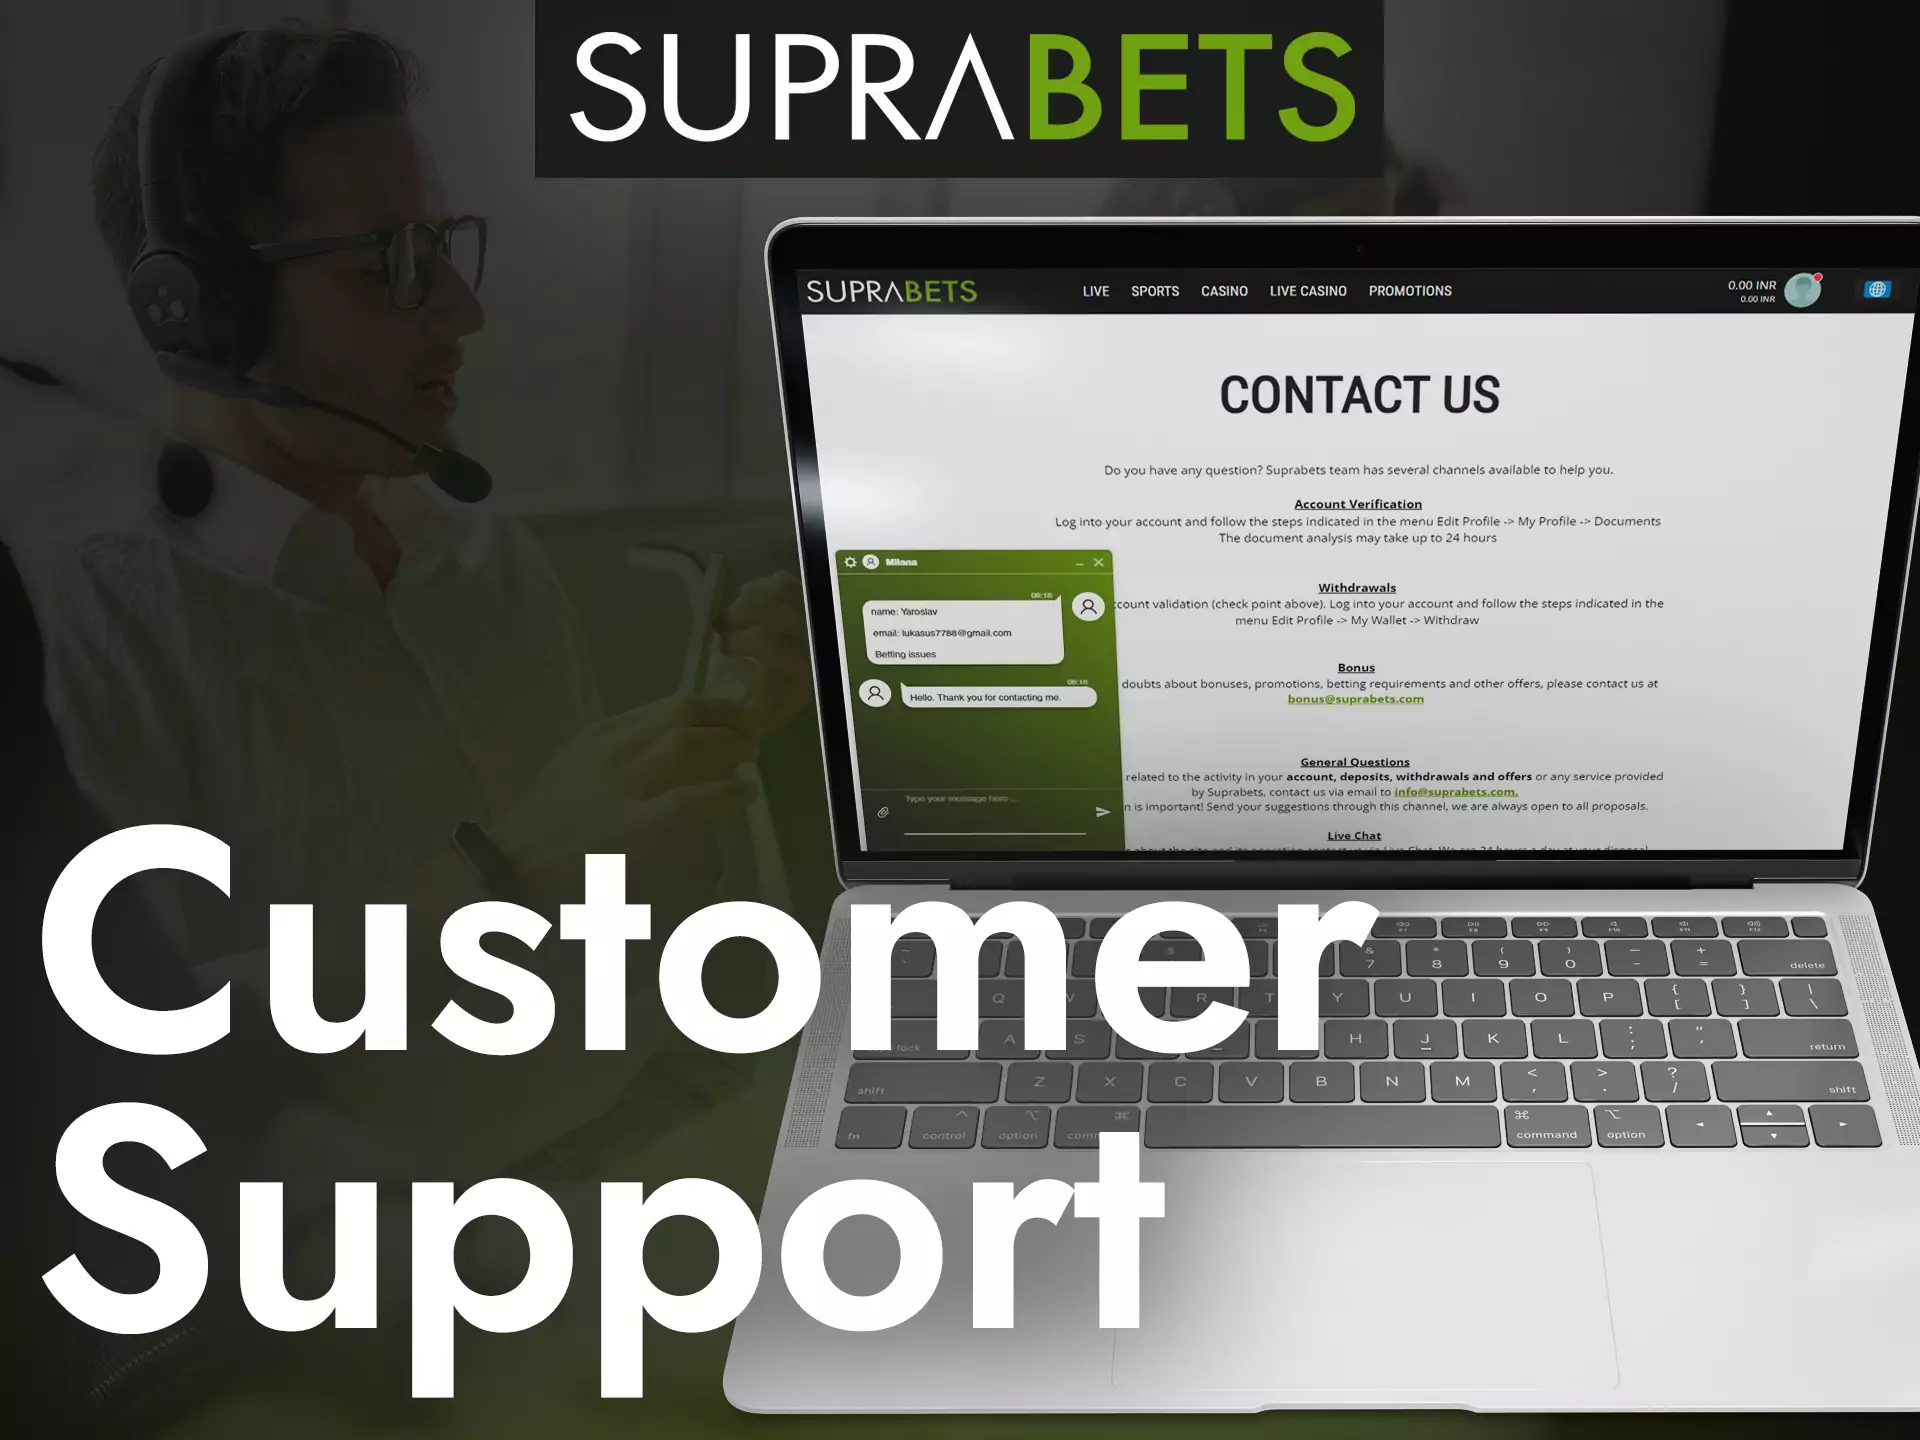 Suprabets support is ready to help all its users with their questions at any time.